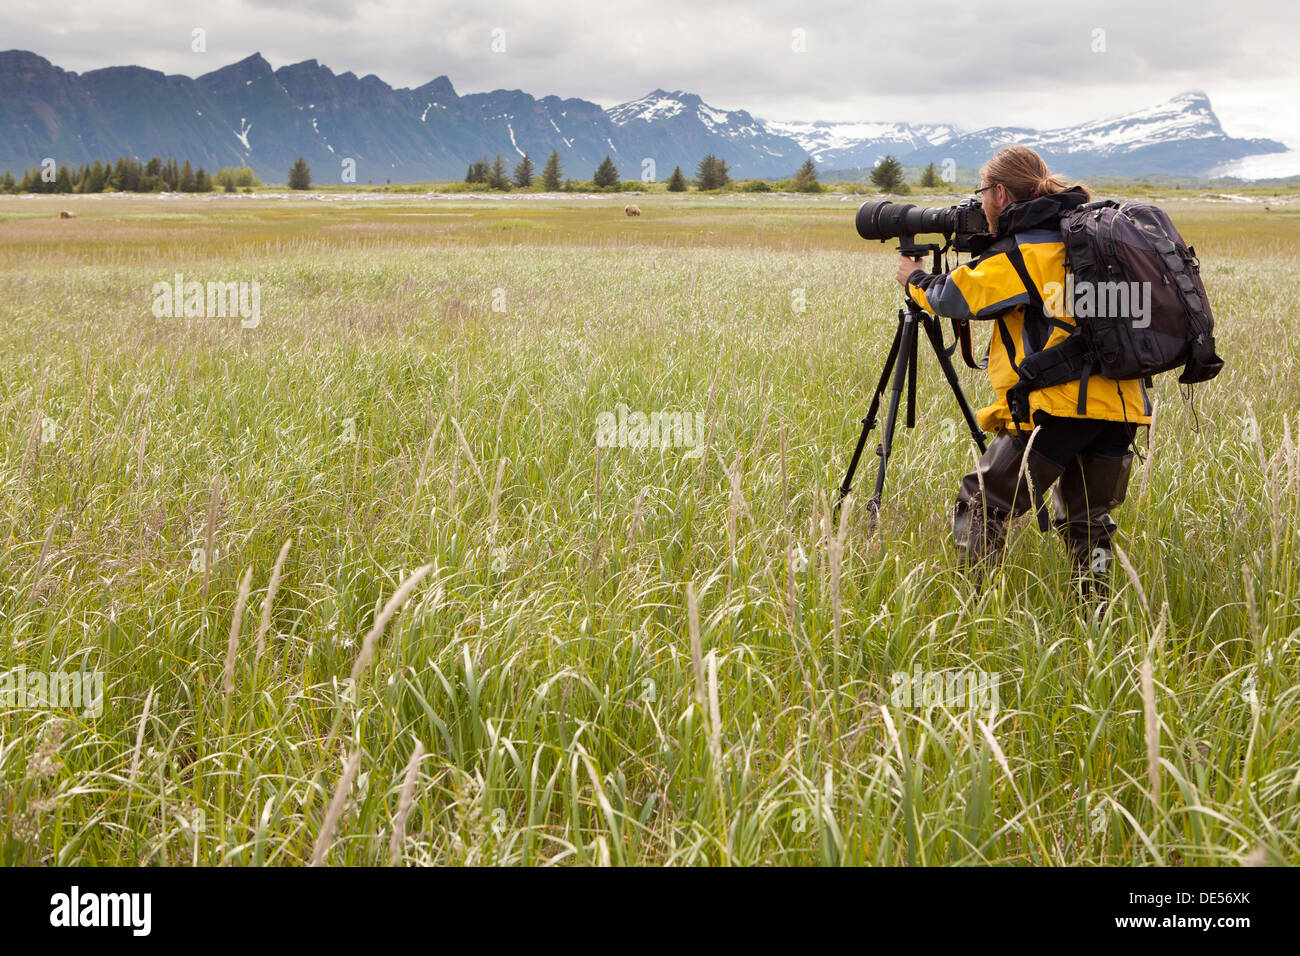 Taking pictures of grizzly bears, Katmai National Park, Alaska, U.S.A. Stock Photo